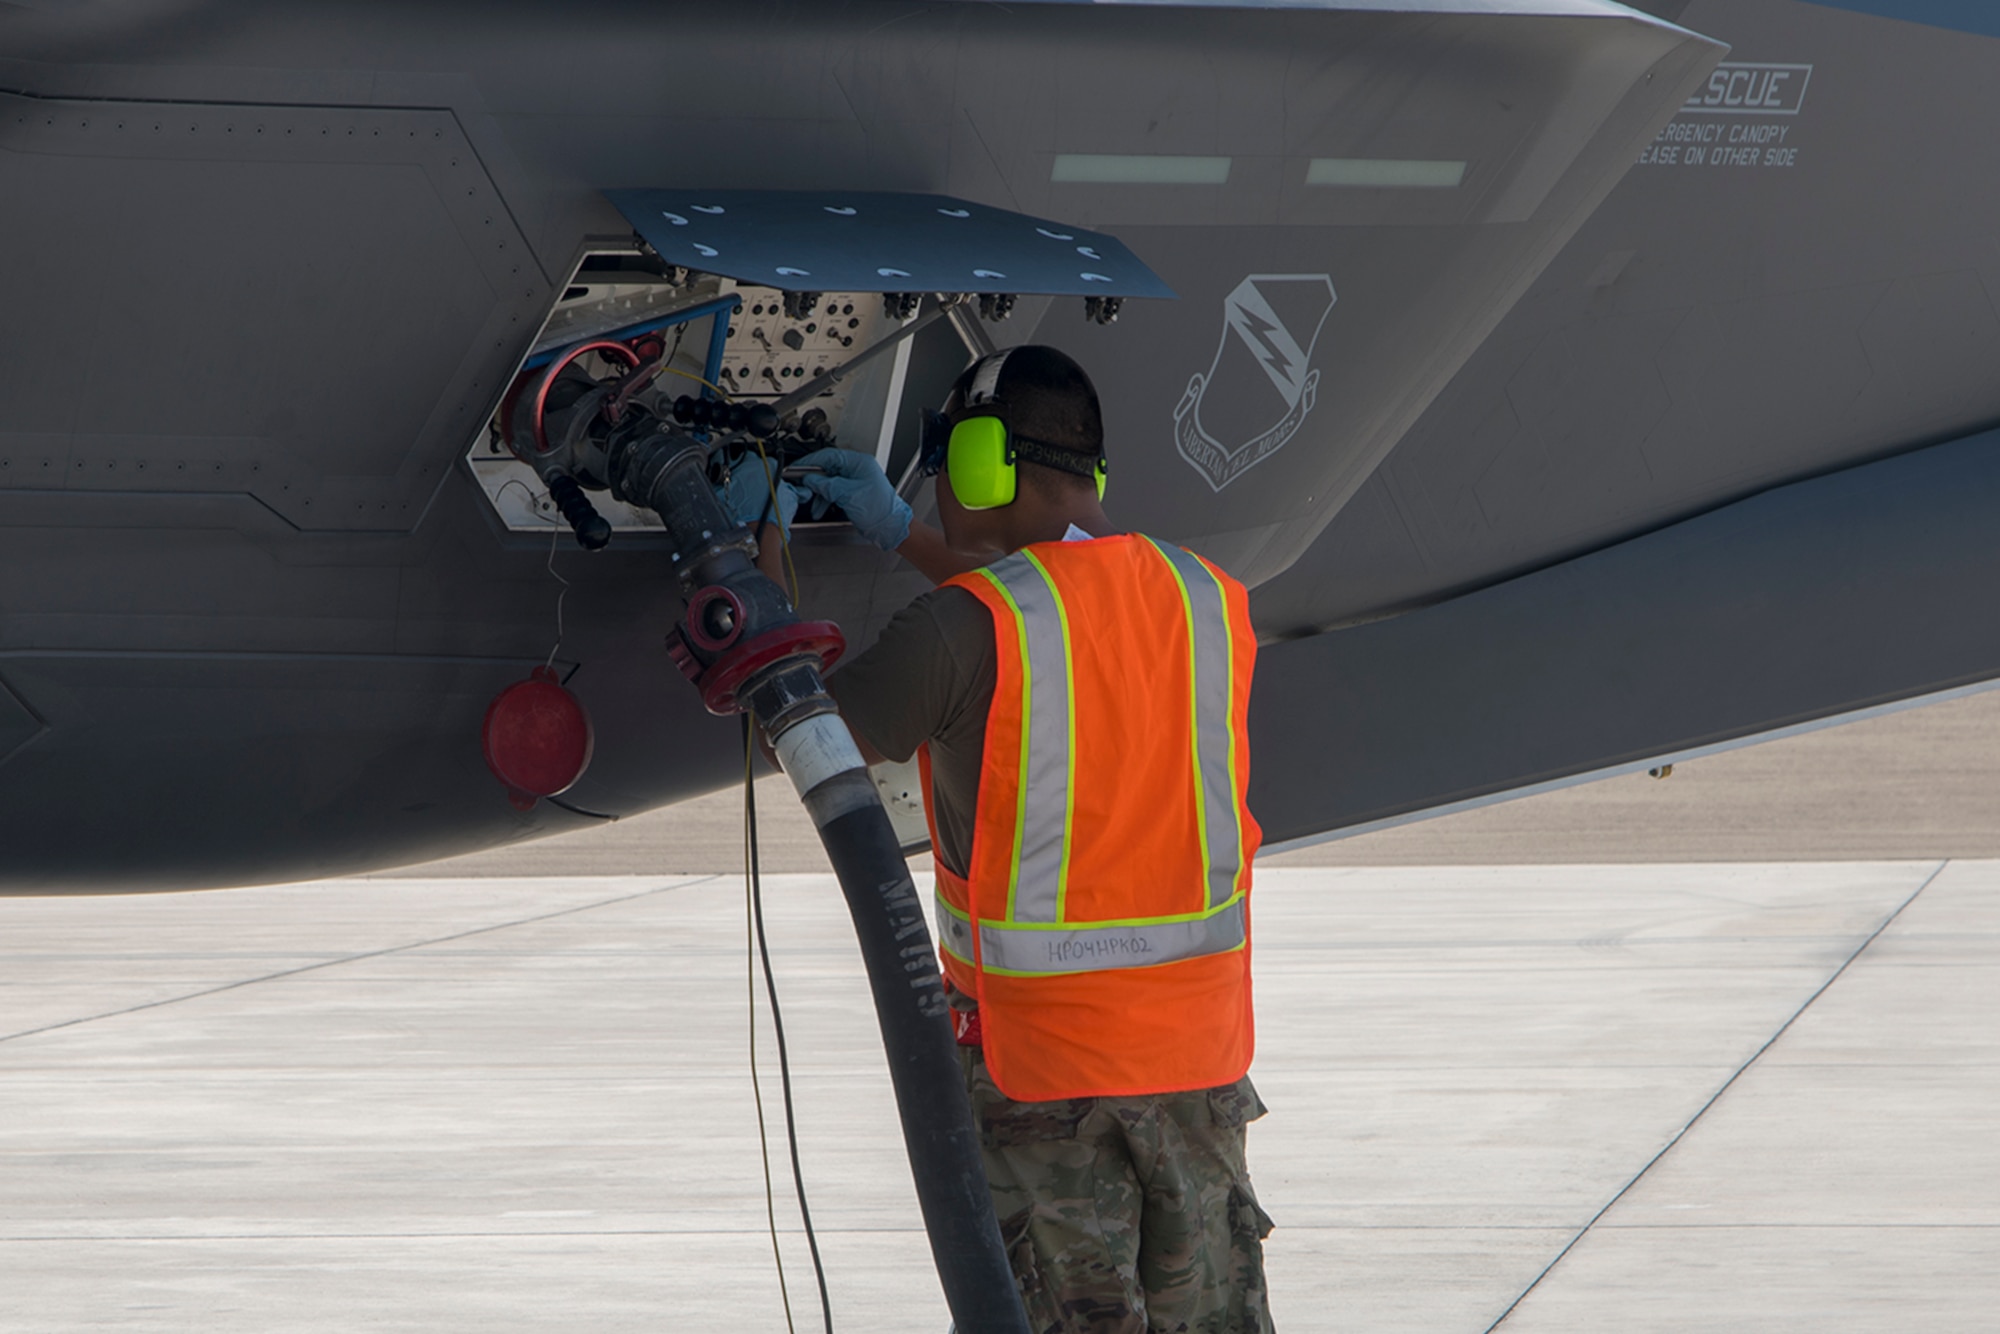 U.S. Air Force Staff Sgt. Kurt Anderson, 380th Air Expeditionary Aircraft Maintenance Squadron avionics journeyman, executes a hot pit refueling of an F-35A Lightning II on the Al Dhafra Air Base flightline, United Arab Emirates, Jan. 29, 2020.  A hot pit refueling is the process in which ground crew Airmen refuel an aircraft while its engines are still running, minimizing the time required to get the aircraft airborne again. This is the first-time that an F-35 has been hot-pit refueled at Al Dhafra Air Base. (U.S. Air Force photo by Staff Sgt. Anna-kay Ellis)